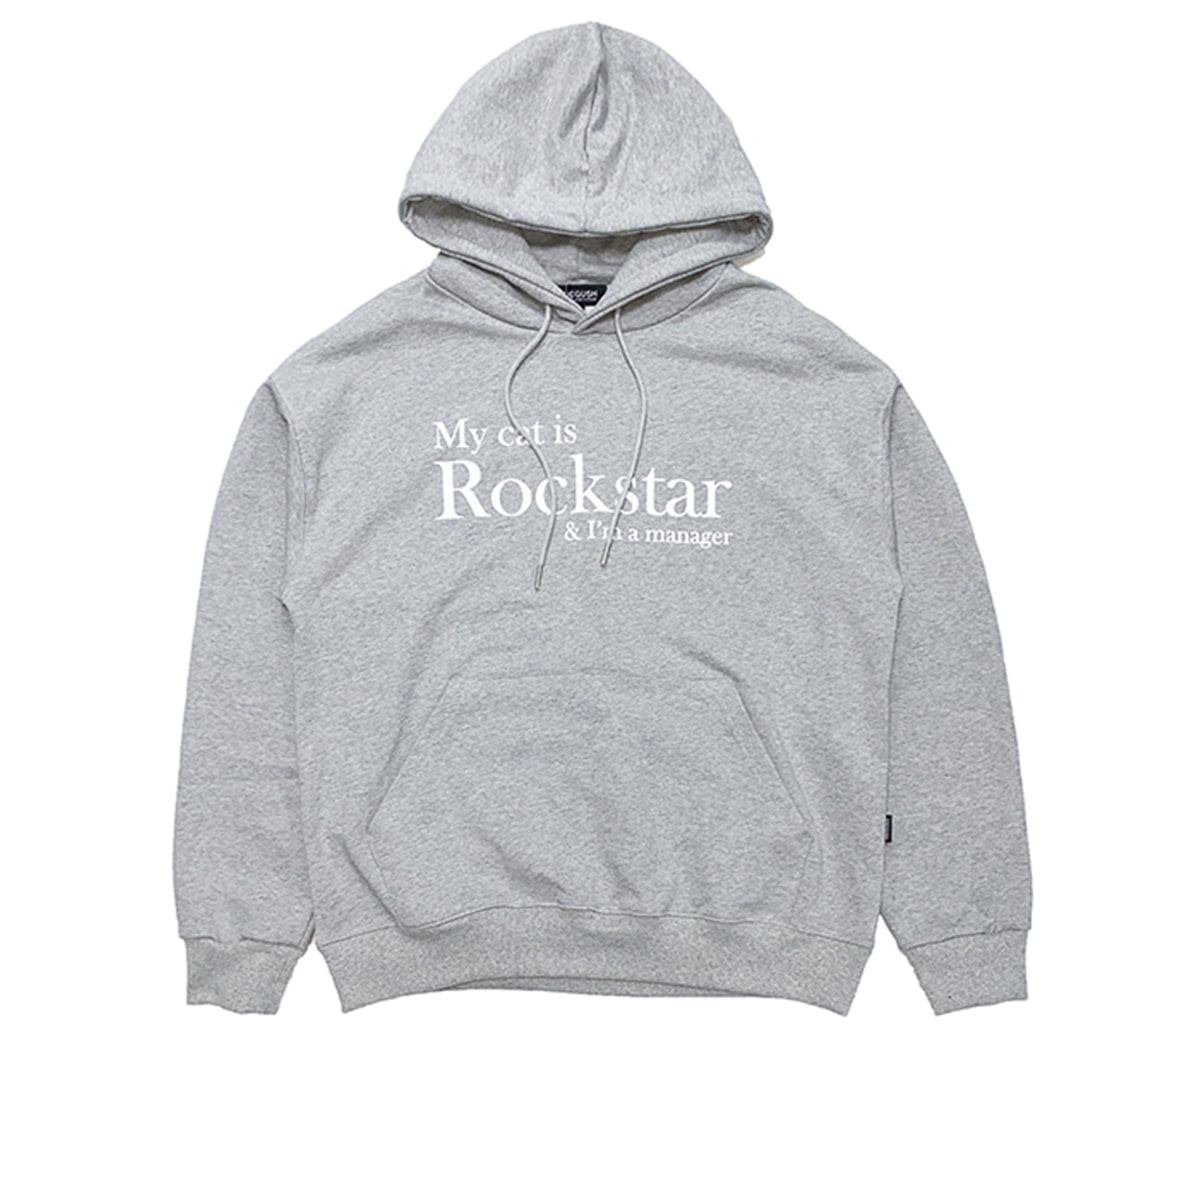 My cat is Rockstar &amp; I&#039;m a manager HOODIE ver. (Grey)